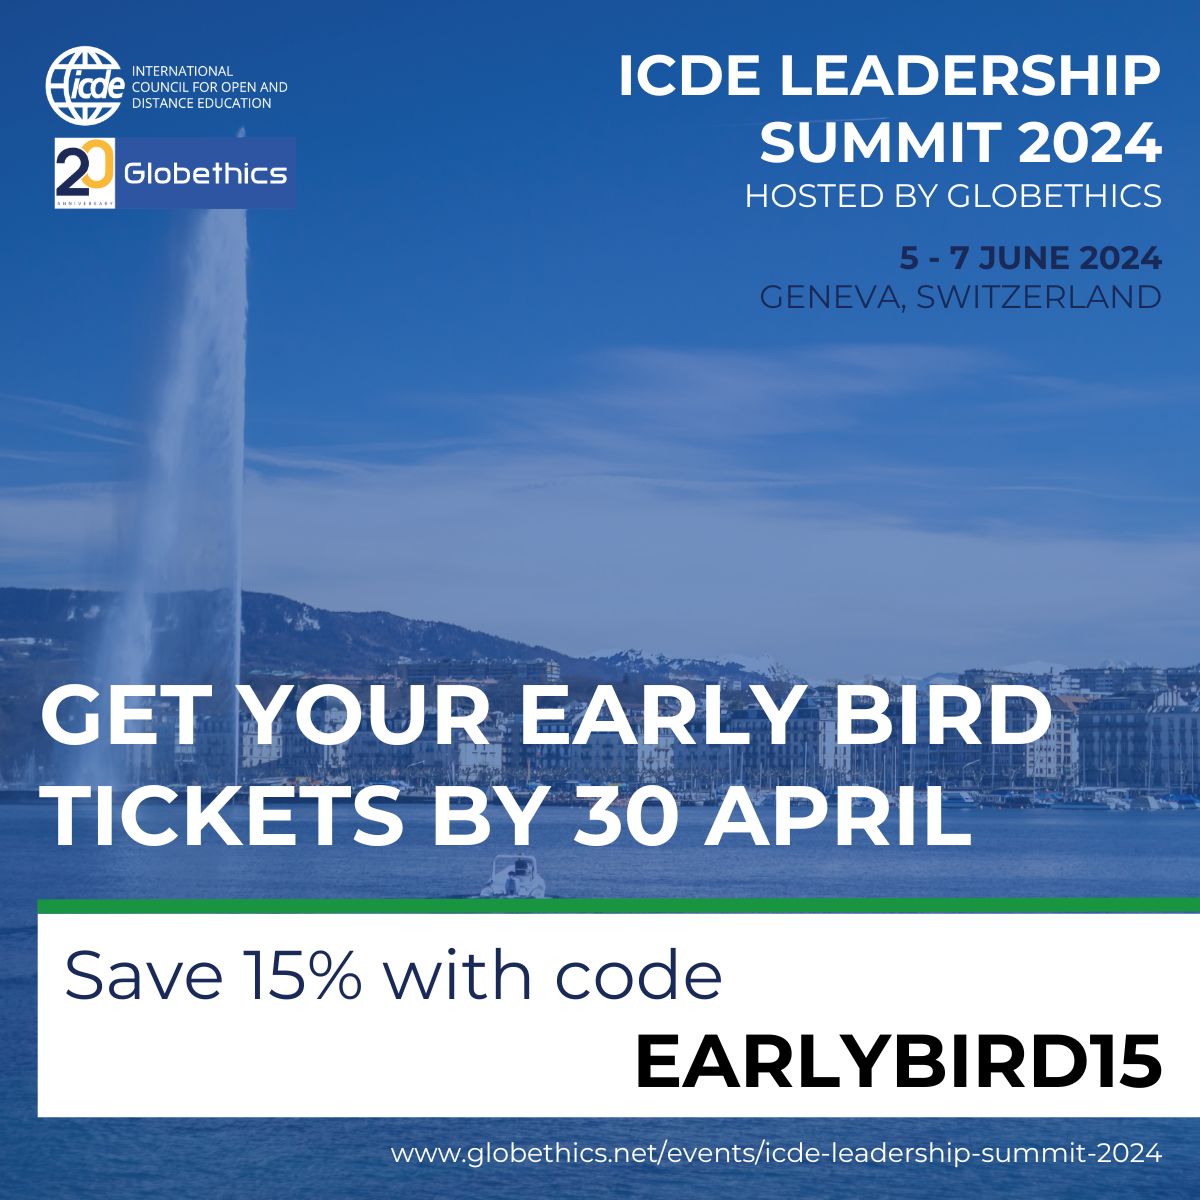 🔔LAST CALL🔔
💬Want 15% off your ticket to the #ICDELS24 ? One week left to receive 15% off your ticket using our Early Bird Discount.
👉 Go to bit.ly/3JsF0yf
👉 Select the number of tickets
👉Click 'Have promo code?', enter the code EARLYBIRD15 and click 'Apply'